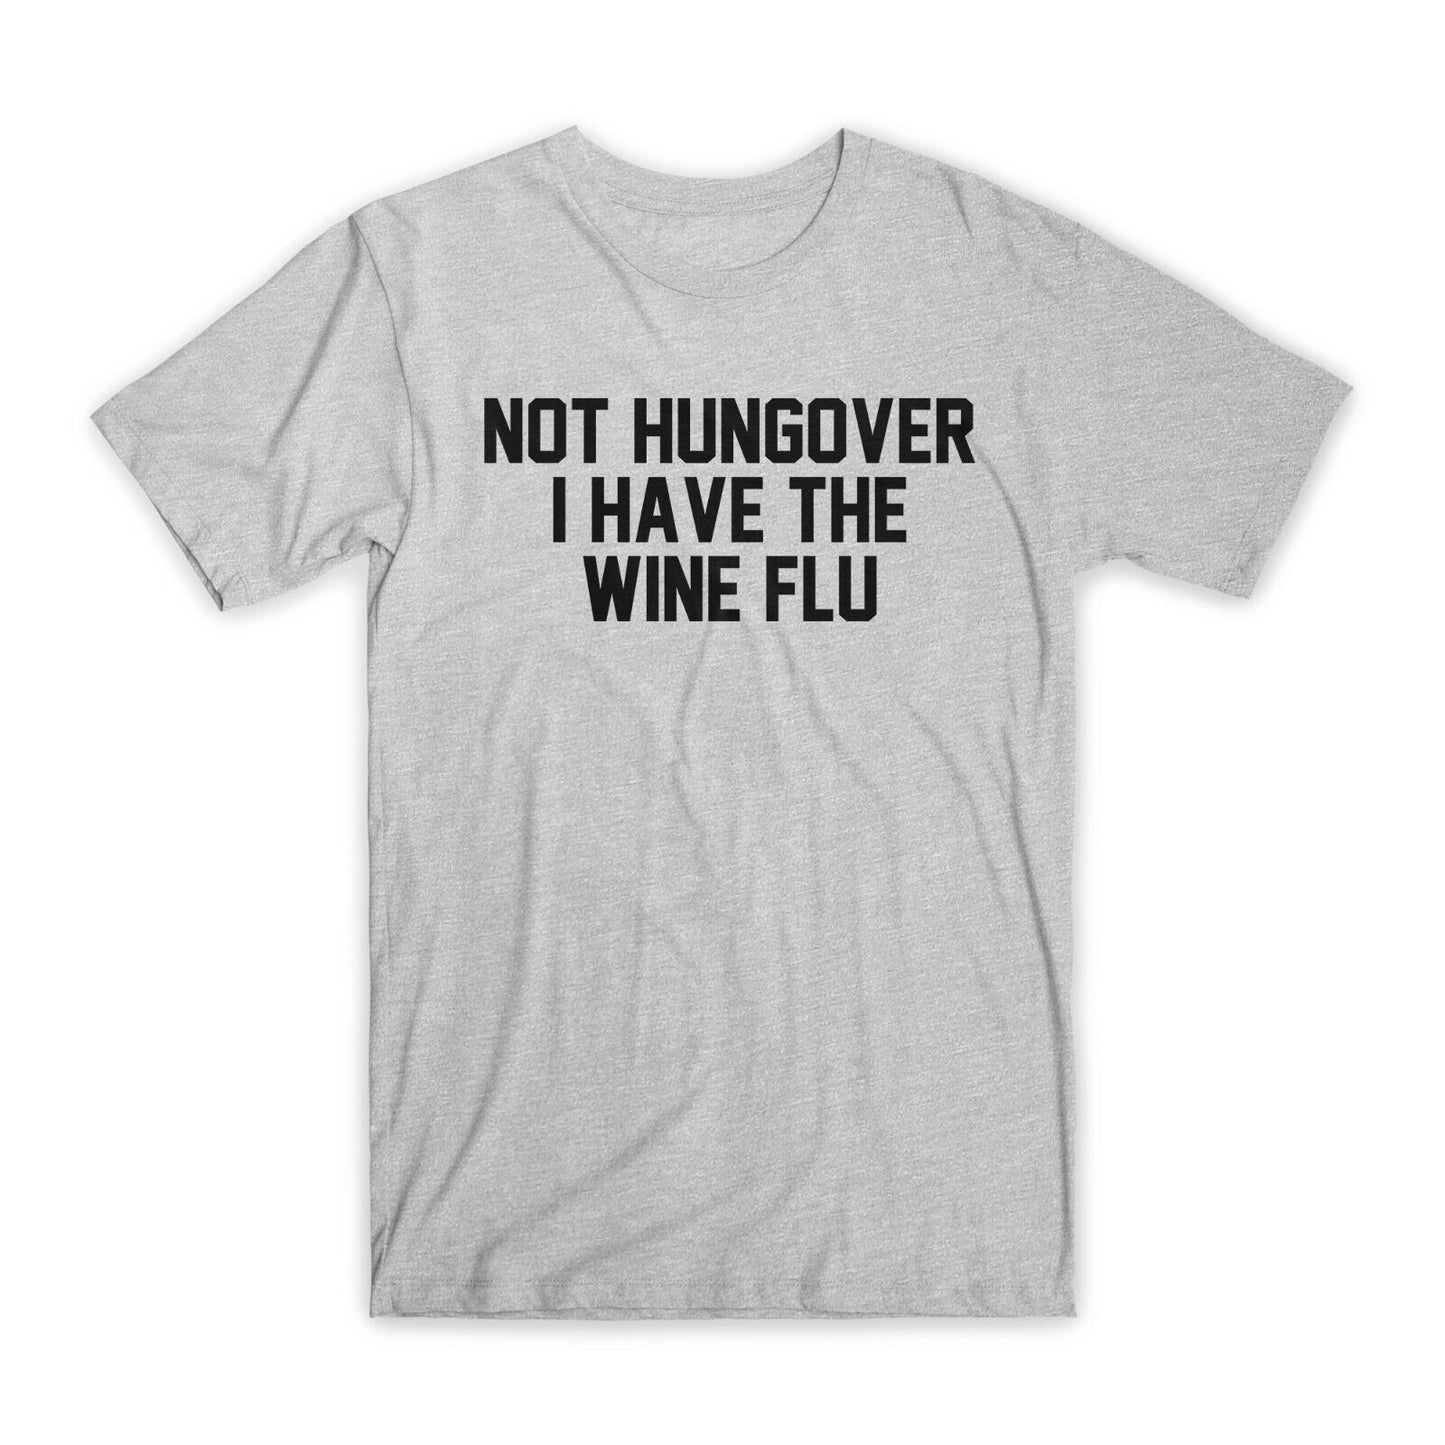 Not Hungover I Have The Wine Flu T-Shirt Premium Soft Cotton Funny Tees Gift NEW